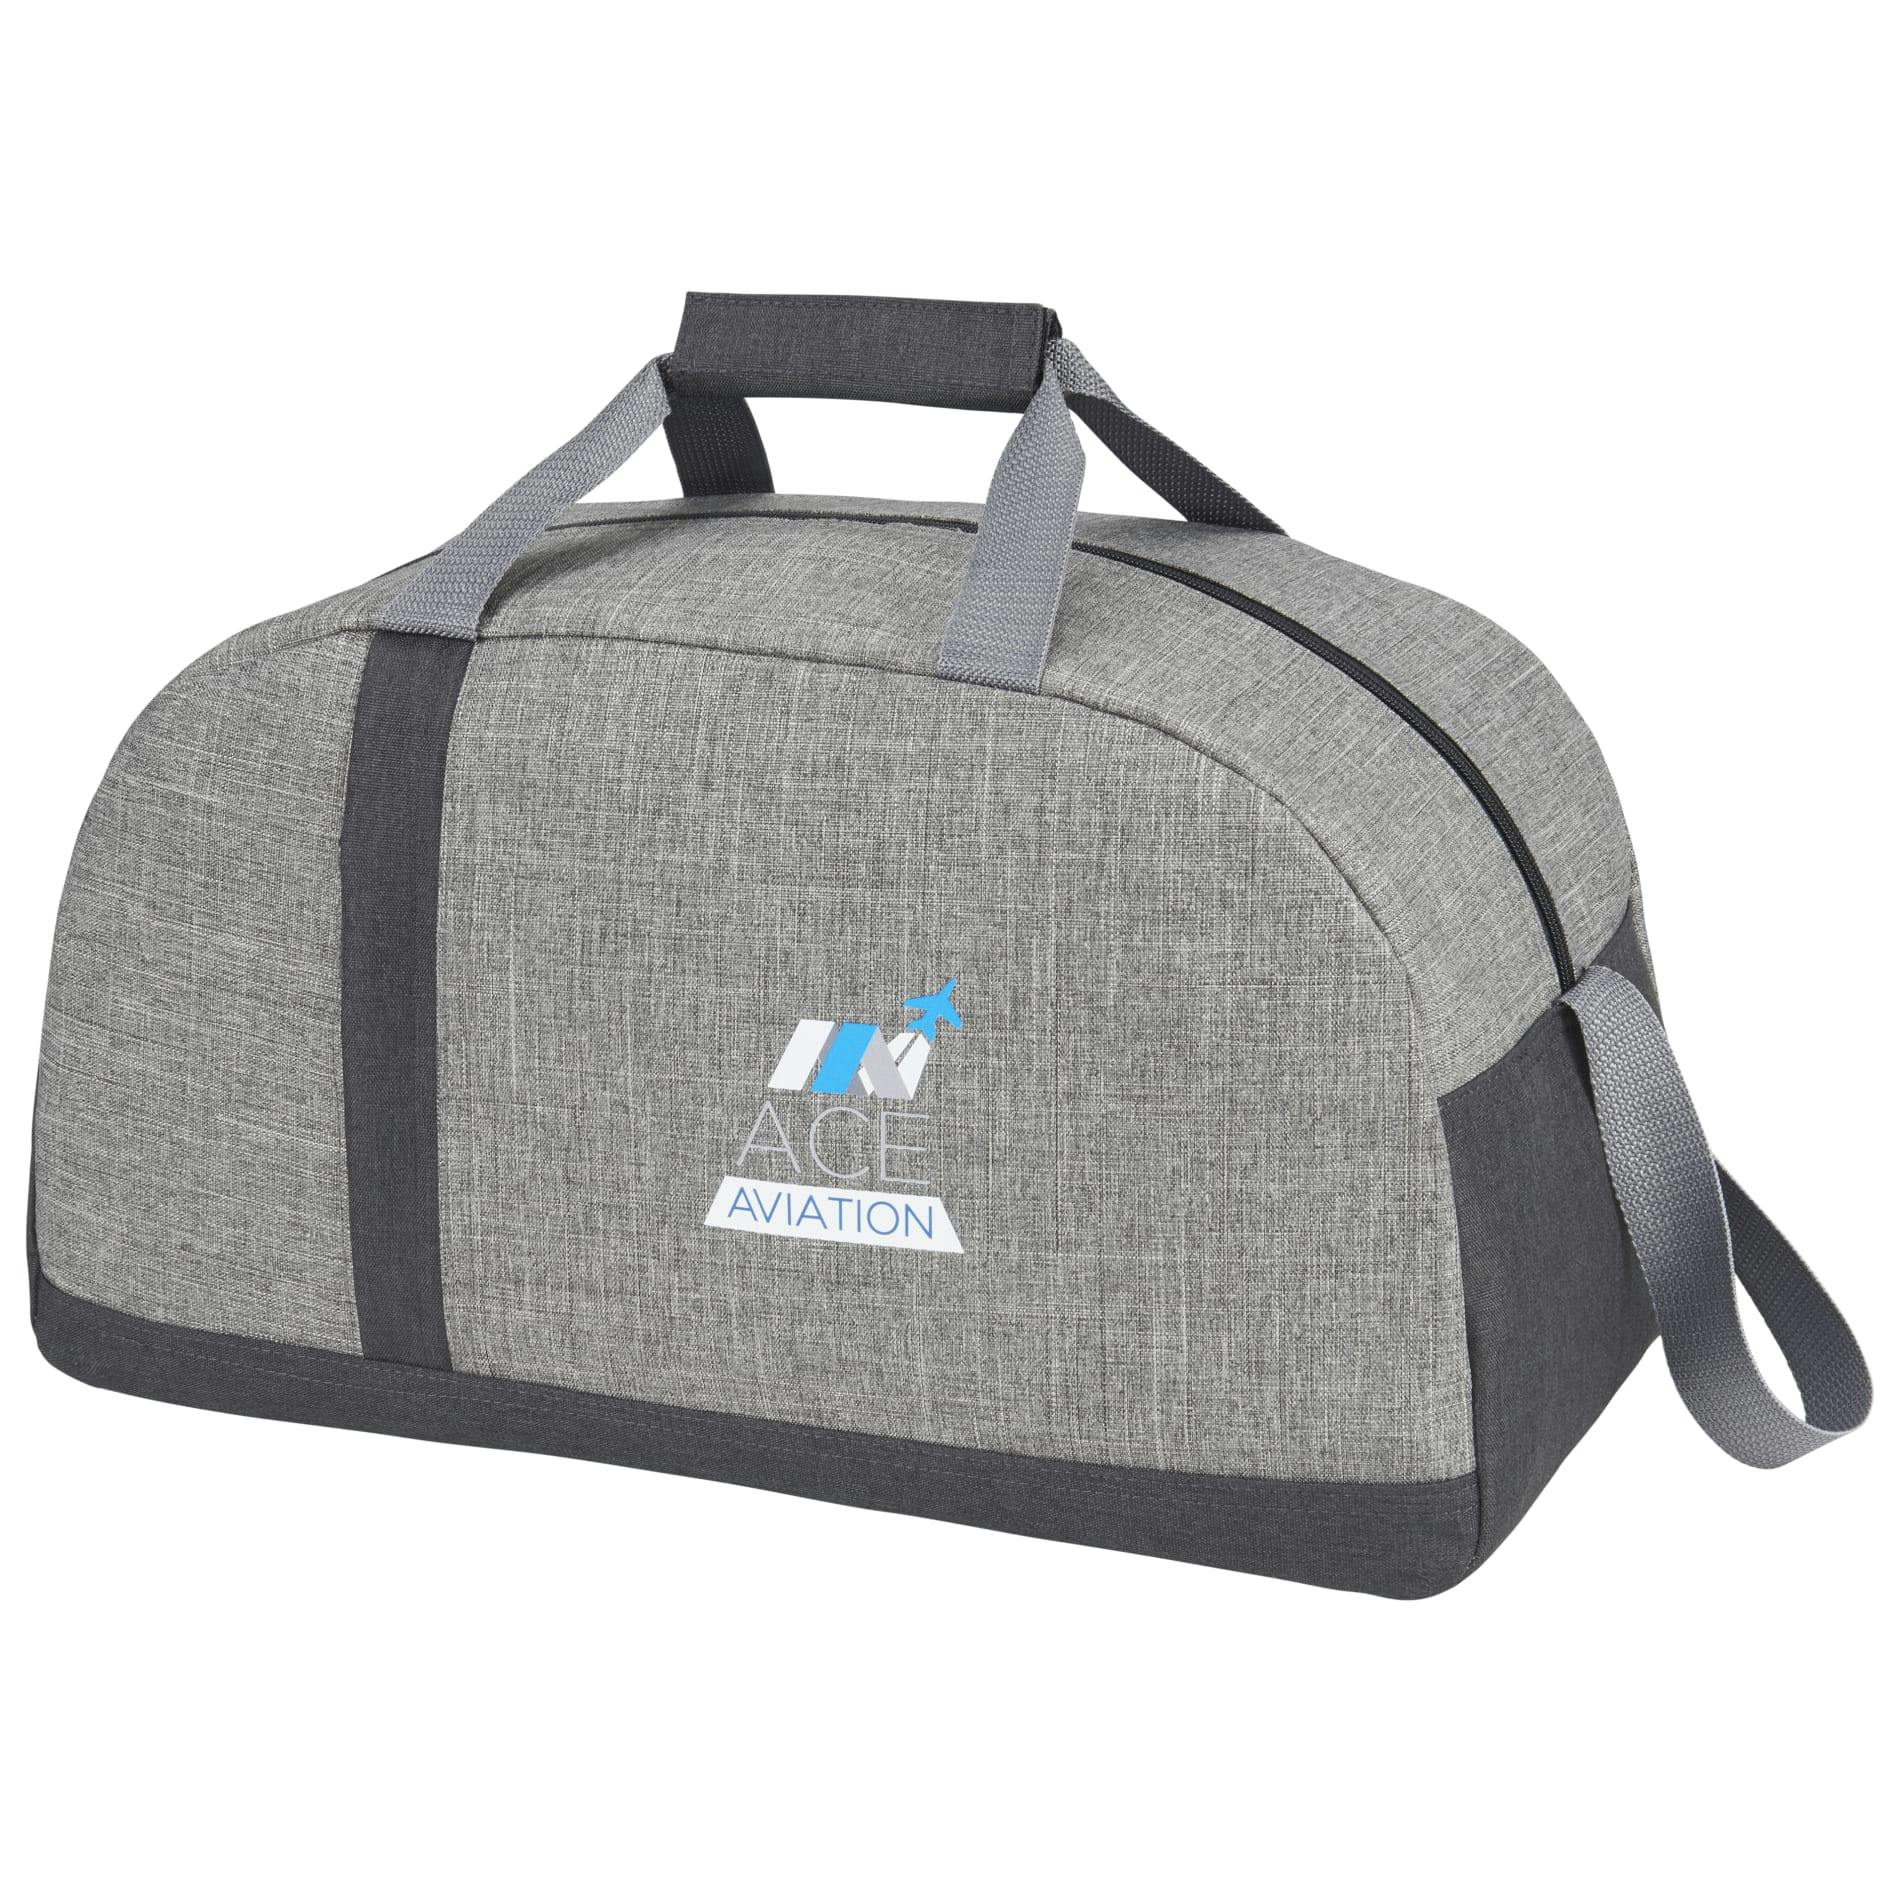 Reclaim Recycled Sport Duffel - additional Image 2